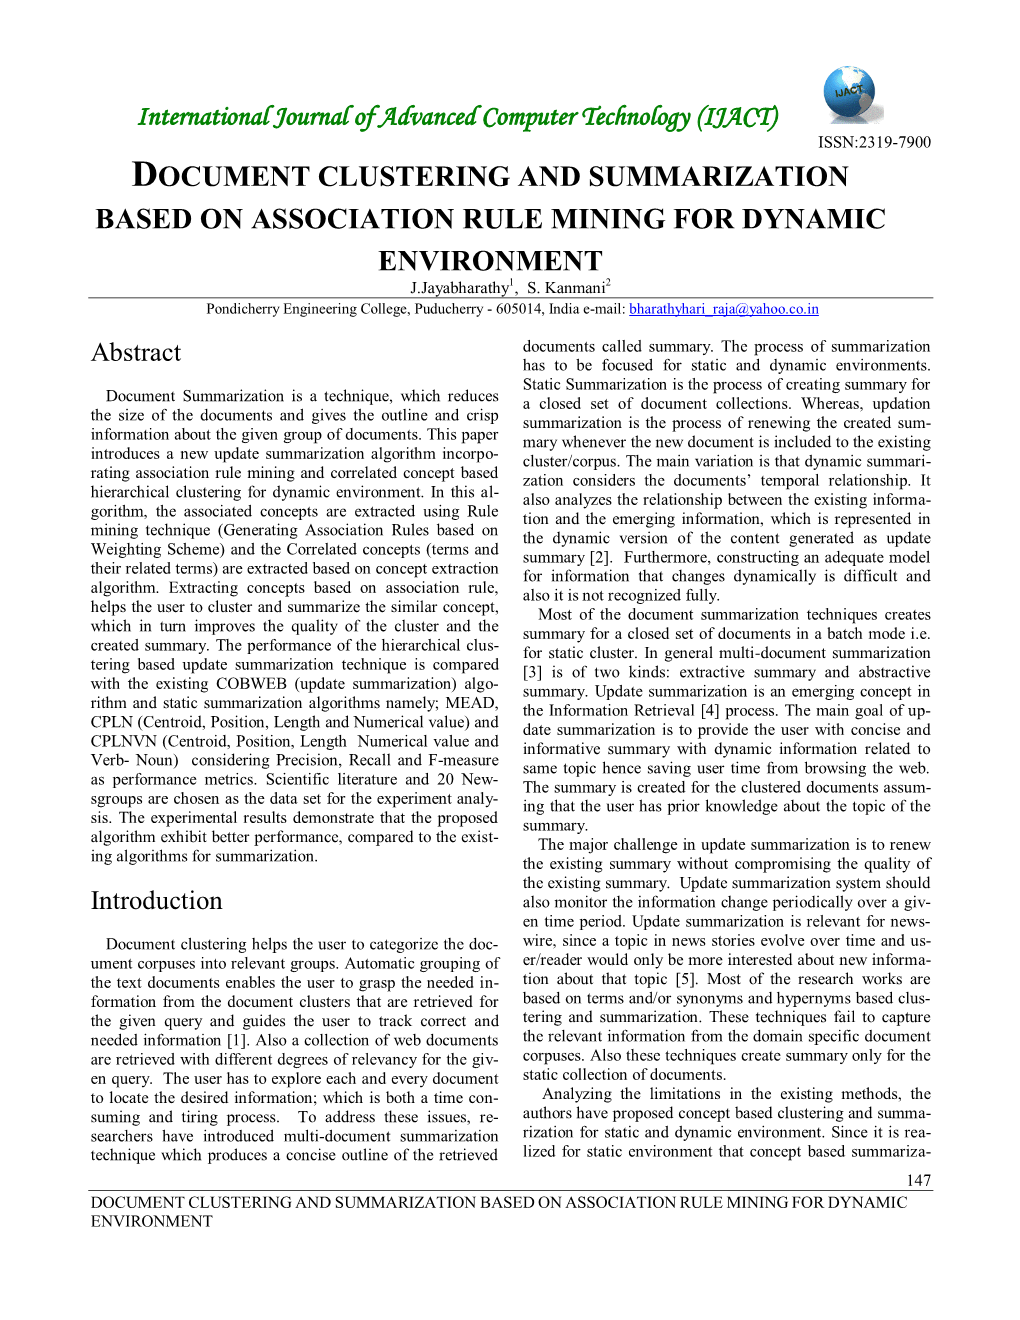 DOCUMENT CLUSTERING and SUMMARIZATION BASED on ASSOCIATION RULE MINING for DYNAMIC ENVIRONMENT J.Jayabharathy1, S